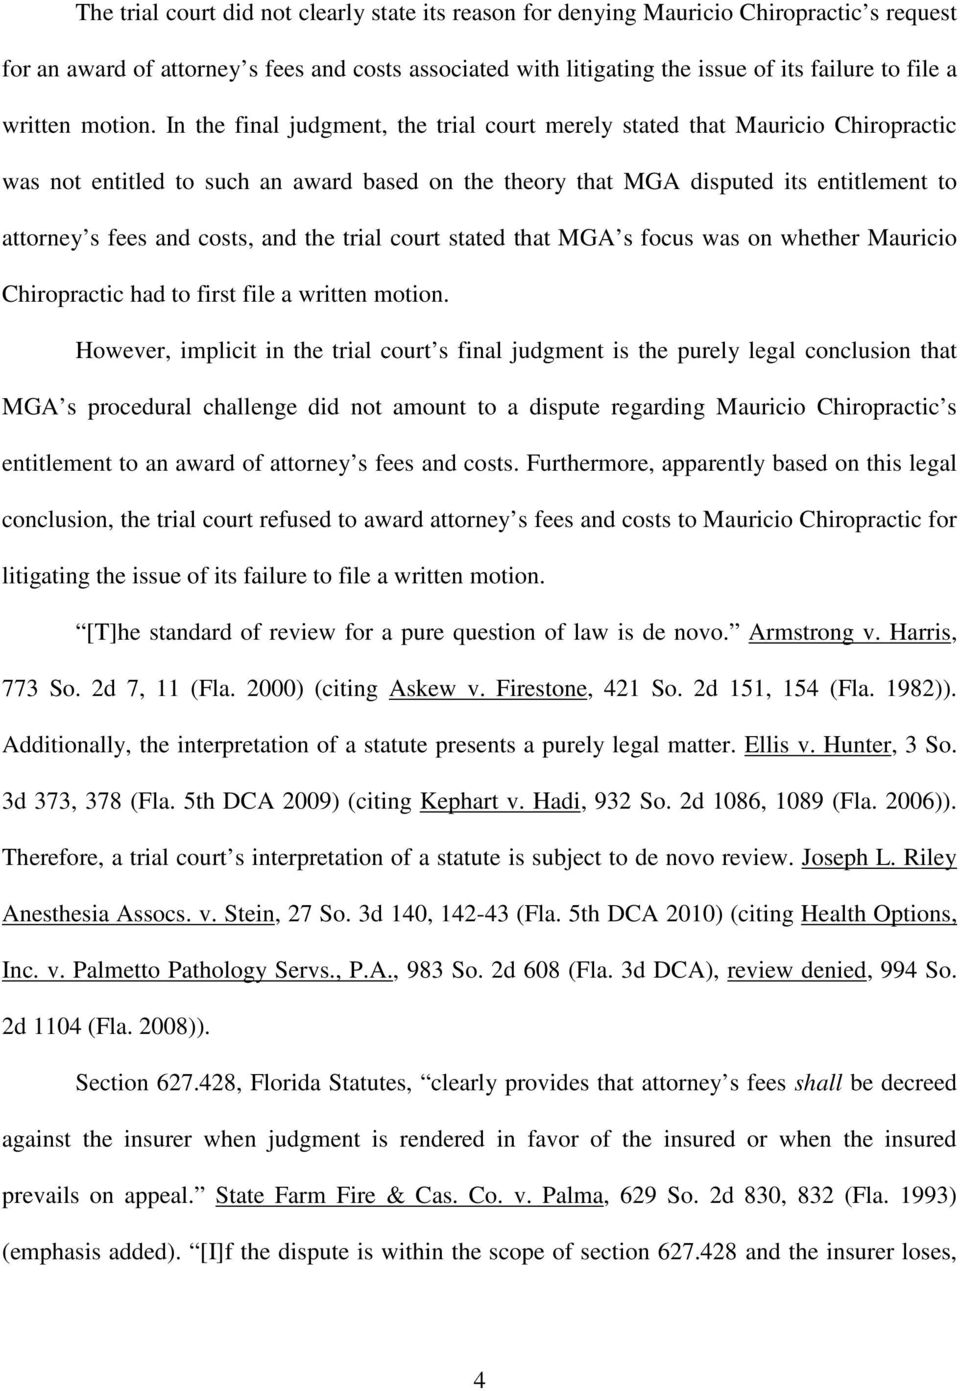 In the final judgment, the trial court merely stated that Mauricio Chiropractic was not entitled to such an award based on the theory that MGA disputed its entitlement to attorney s fees and costs,